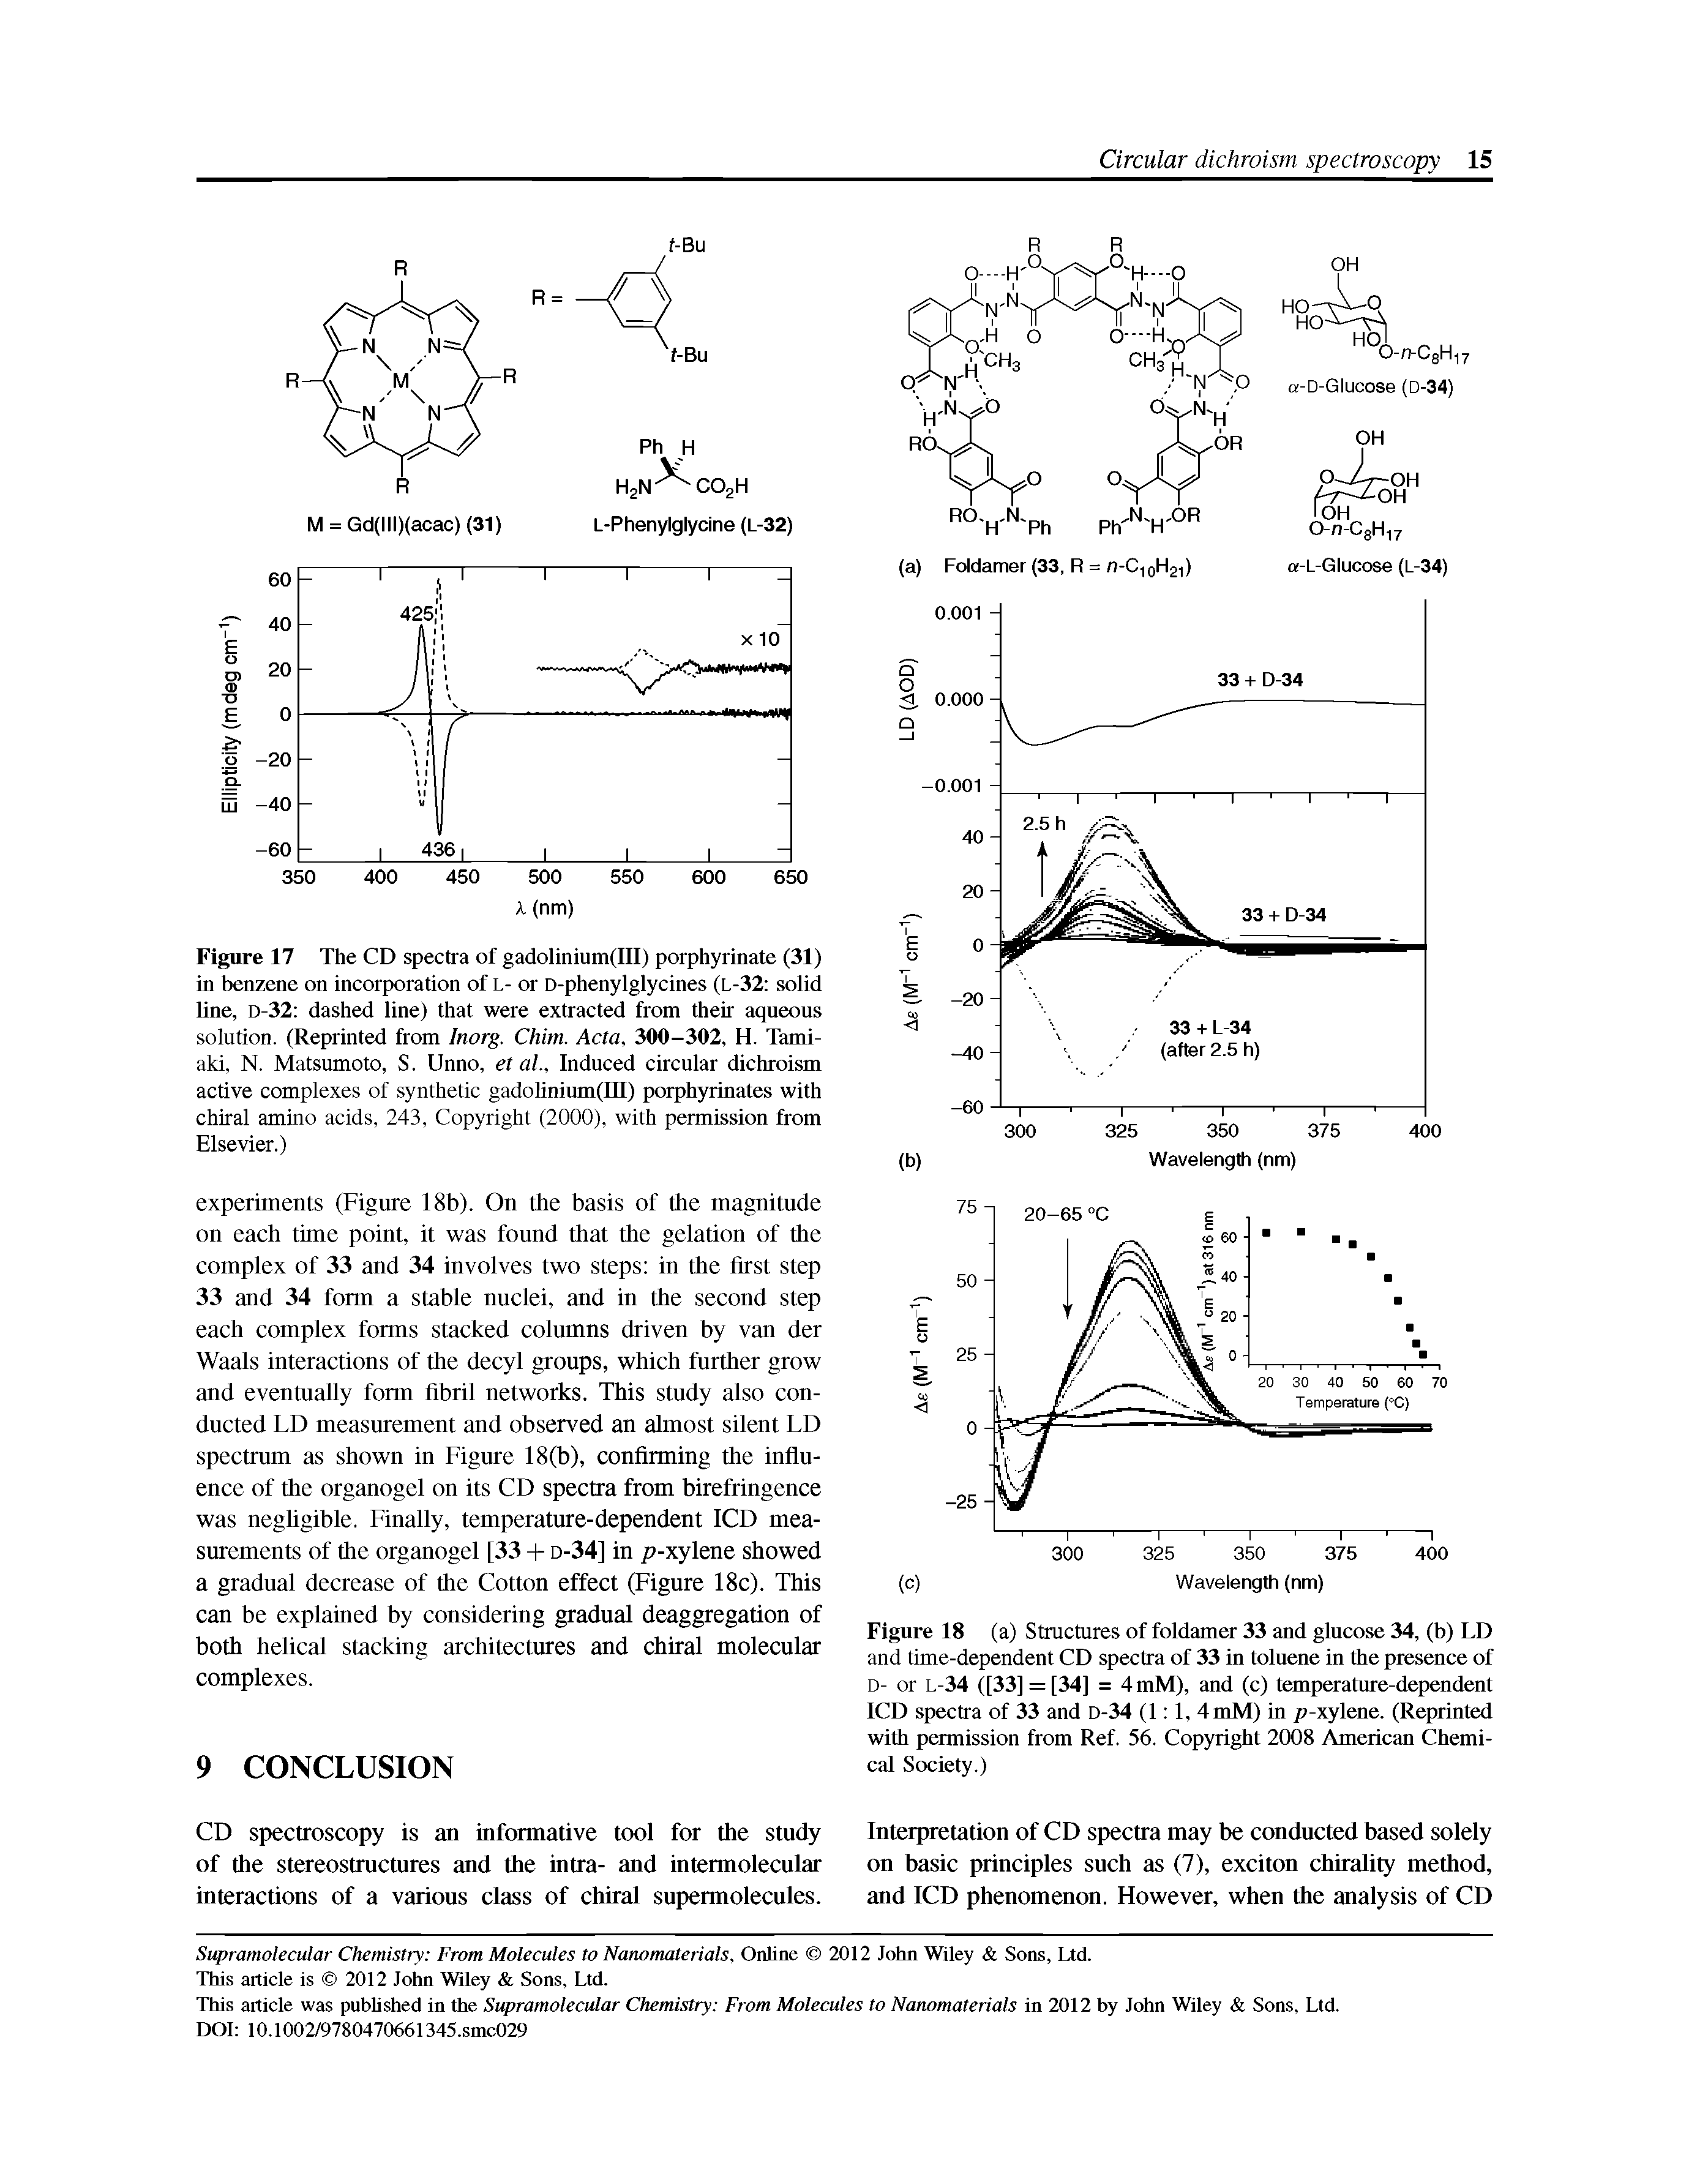 Figure 17 The CD spectra of gadolinium(III) porphyrinate (31) in benzene on incorporation of L- or D-phenylglycines (L-32 solid line, d-32 dashed line) that were extracted from their aqueous solution. (Reprinted from Inorg. Chim. Acta, 300-302, H. Tami-aki, N. Matsumoto, S. Unno, et al.. Induced circular dichroism active complexes of synthetic gadolinium(III) porphyrinates with chiral amino acids, 243, Copyright (2000), with permission from Elsevier.)...